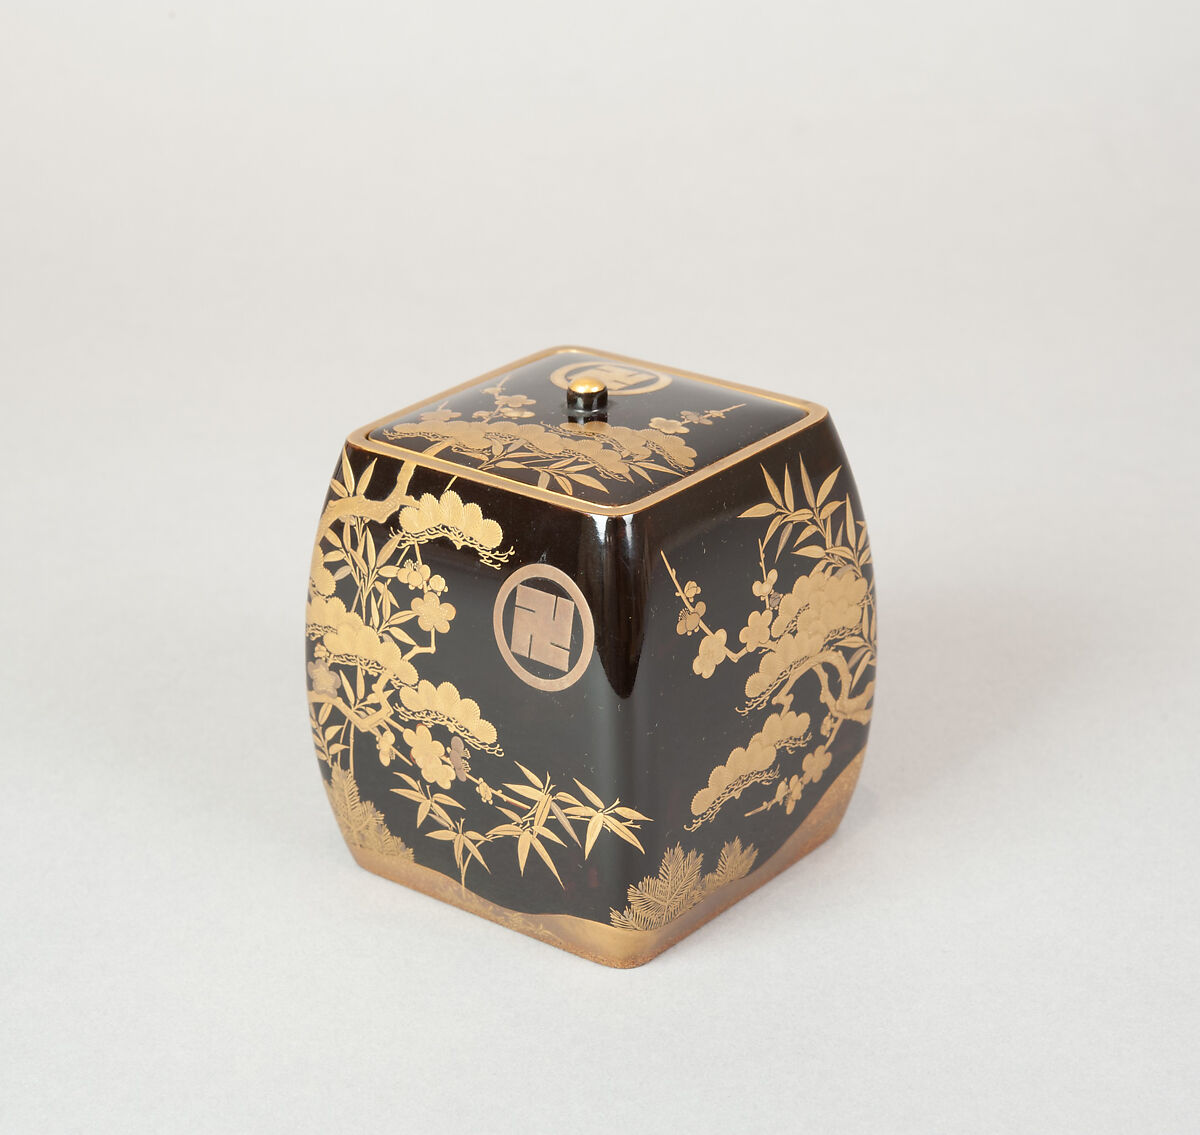 Ash Container (Takigara-ire) for Incense Ceremony, with Family Crest, Pine, Bamboo, and Plum, Lacquered wood with gold, silver togidashimaki-e, hiramaki-e, and cutout gold leaf, Japan 